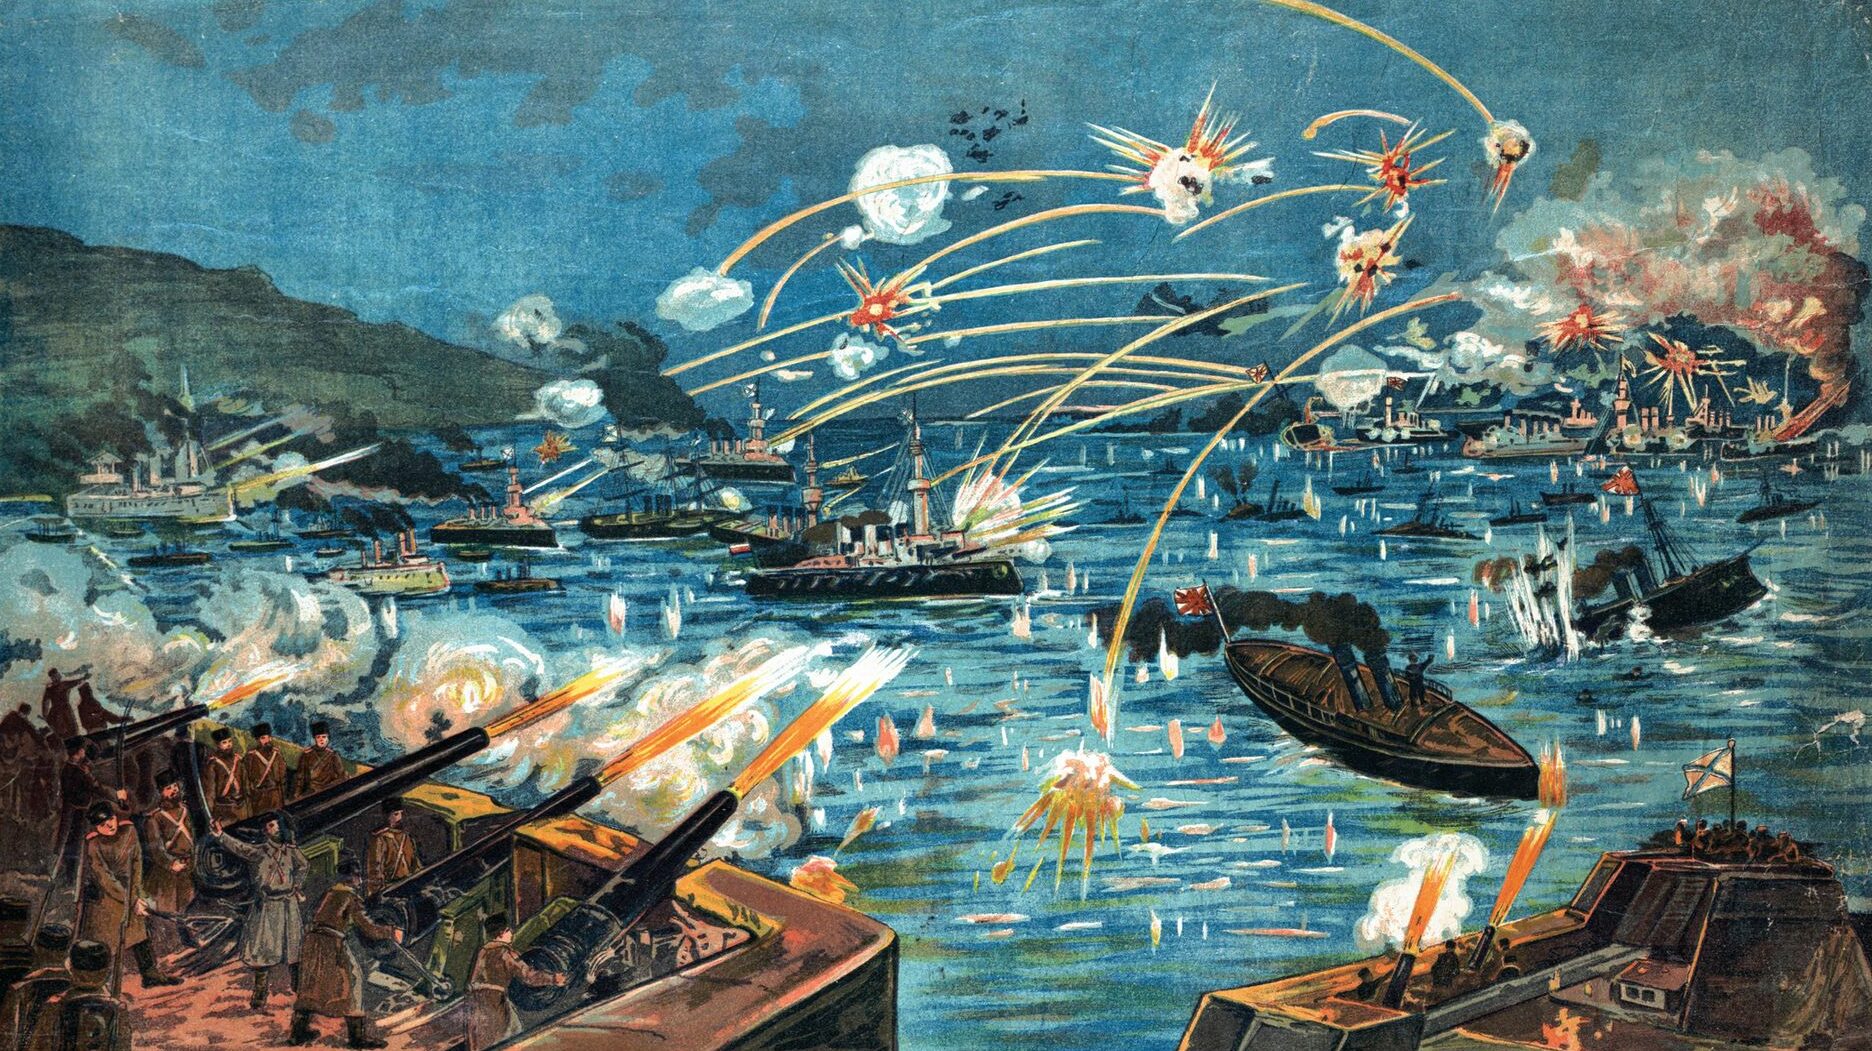 The Japanese Navy commenced the Russo-Japanese War with a surprise attack on the Russian fleet at Port Arthur on February 8, 1904. The attack, like Pearl Harbor, preceded any formal declaration of war by Japan.